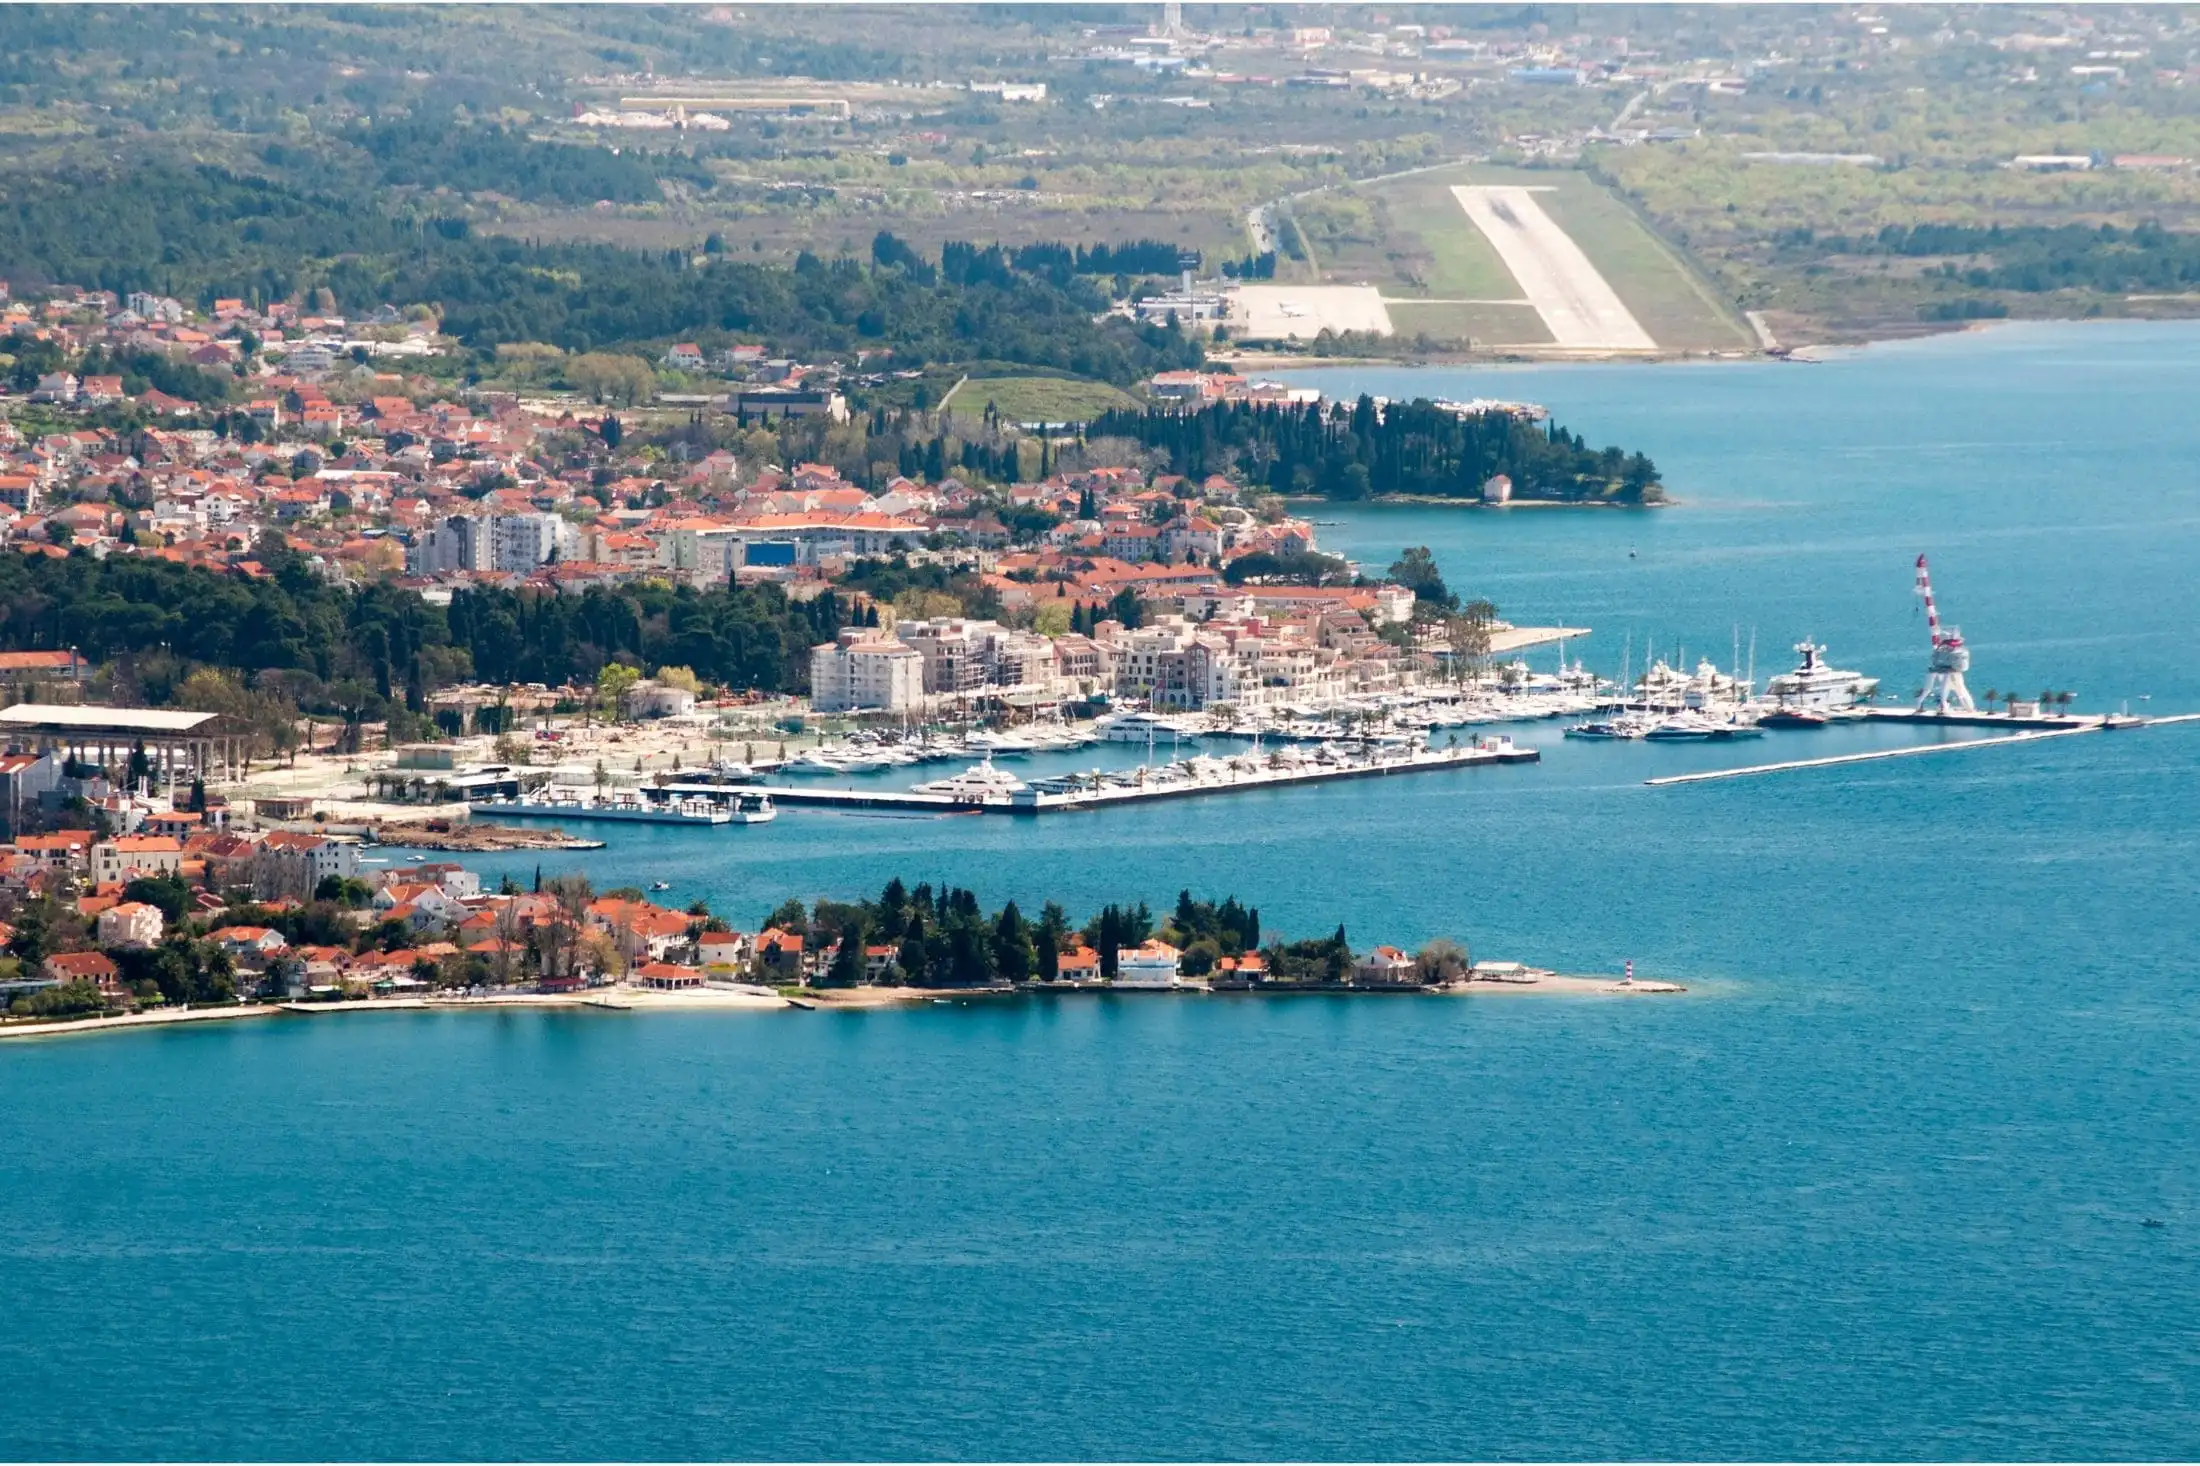 Aerial photo of Tivat, Porto Montenegro and Airport Tivat